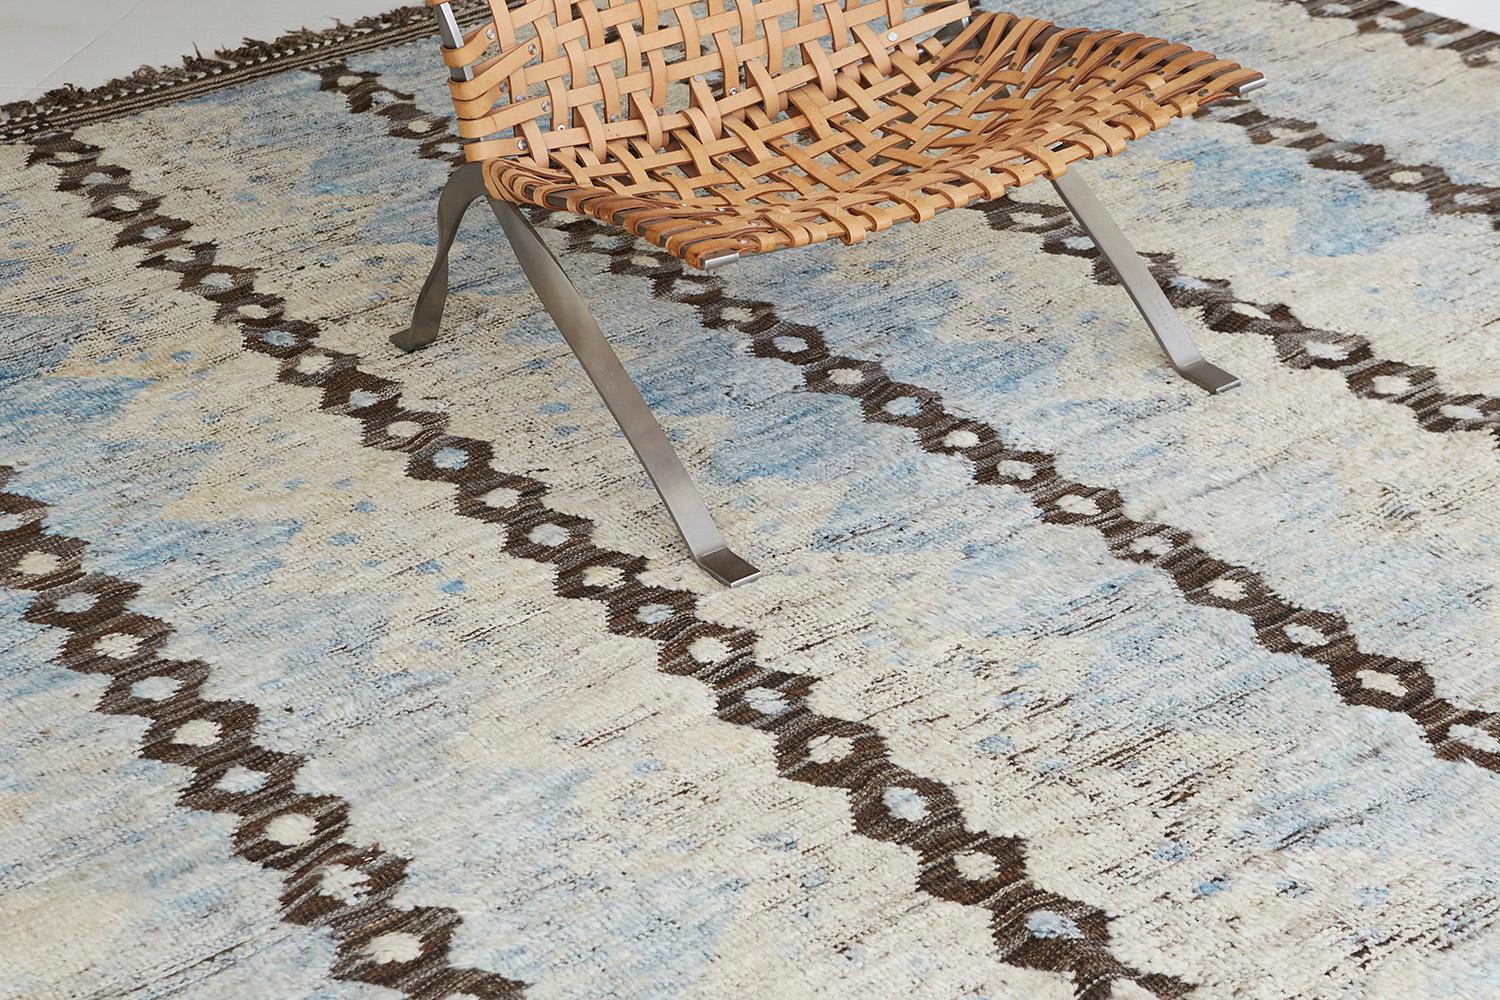 The 'Modlina' rug is a handwoven wool piece inspired by vintage Scandinavian design elements and recreated for the modern design world. The rug's shag balance and harmony, handwoven with a neutral flat weave and unique piles of earth tones. This